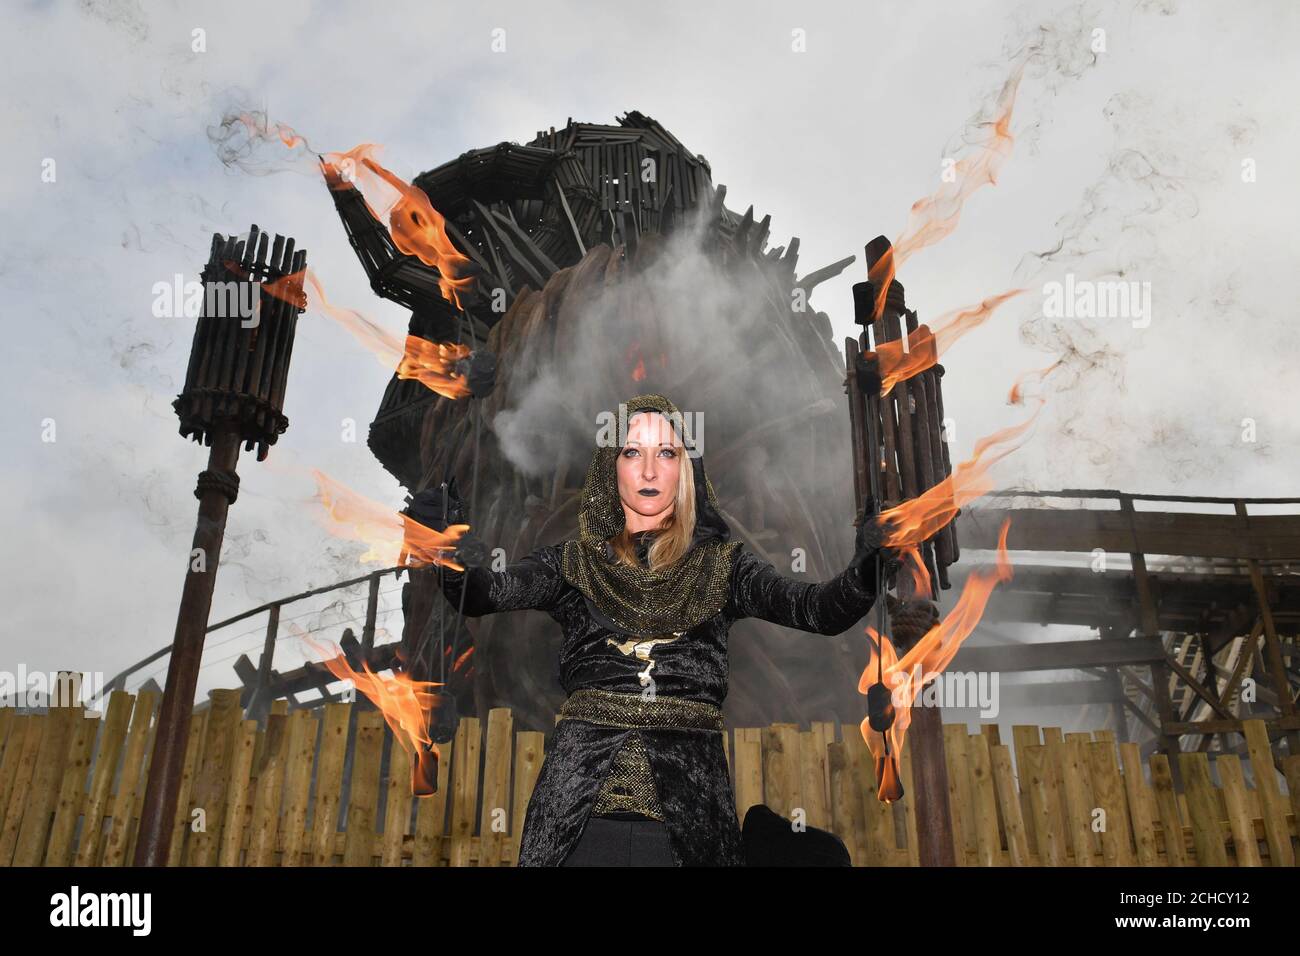 An actress dressed as a Beornen performs with fire at Alton Towers Resort in Stoke-on-Trent, for the opening of the Wicker Man, a wooden rollercoaster which features a six-storey flaming structure. Stock Photo